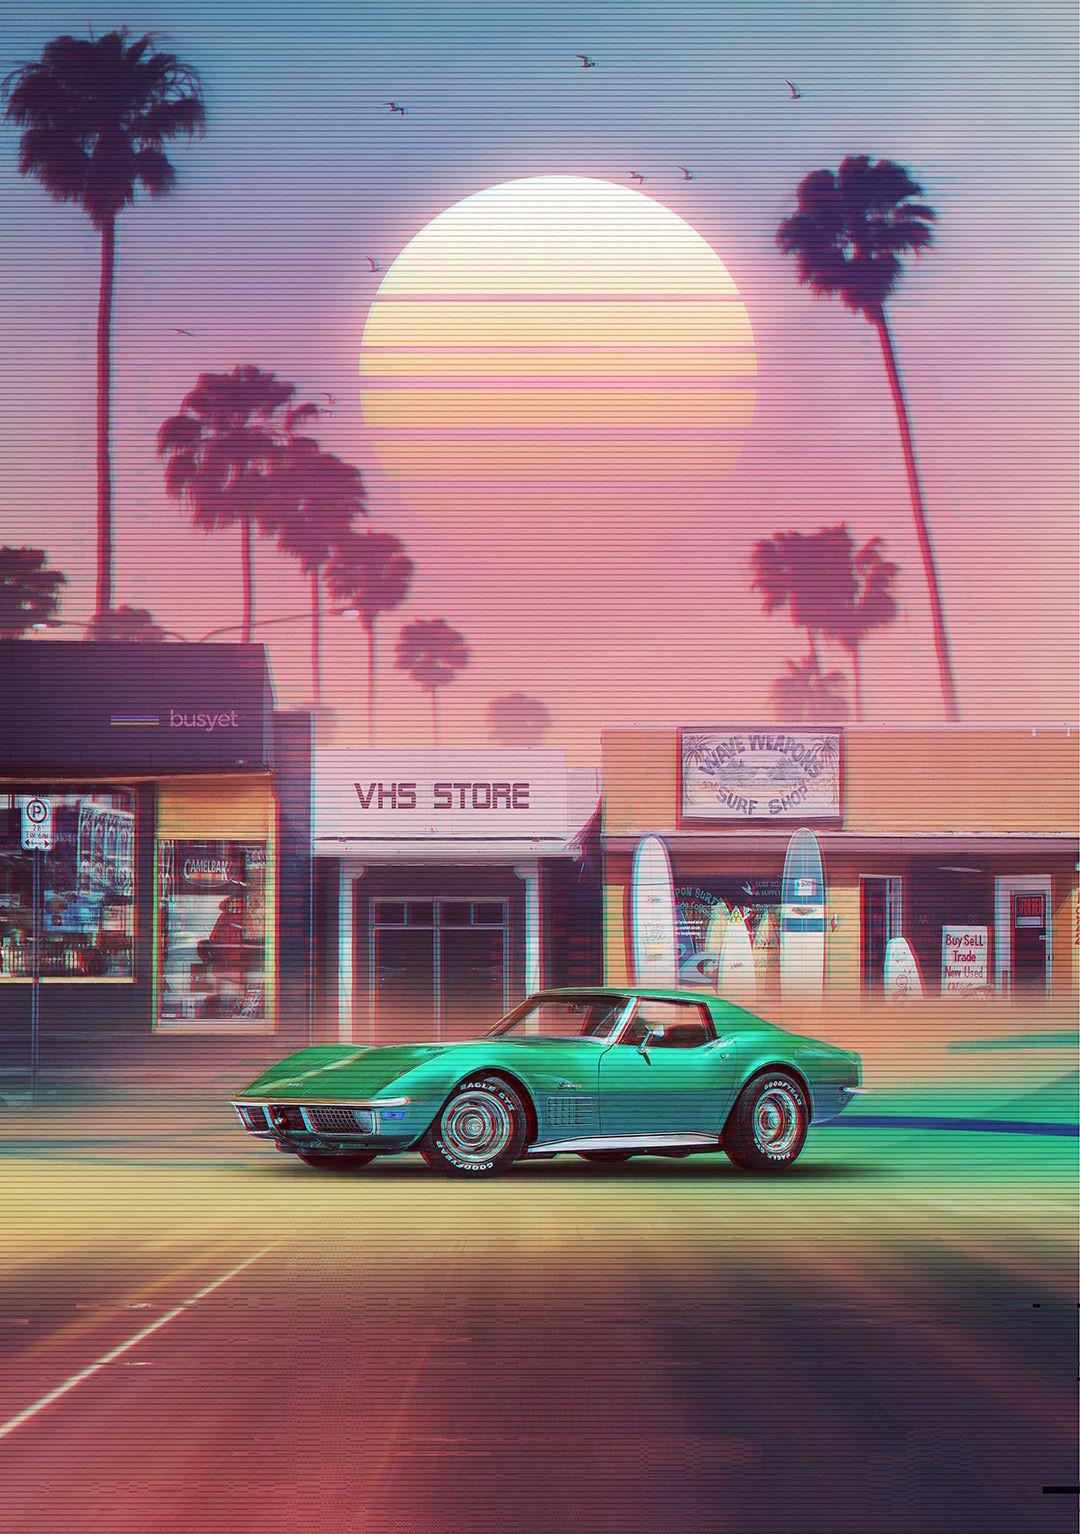 Synthwave Sunset Drive Photographic Print By Dennybusyet Retro